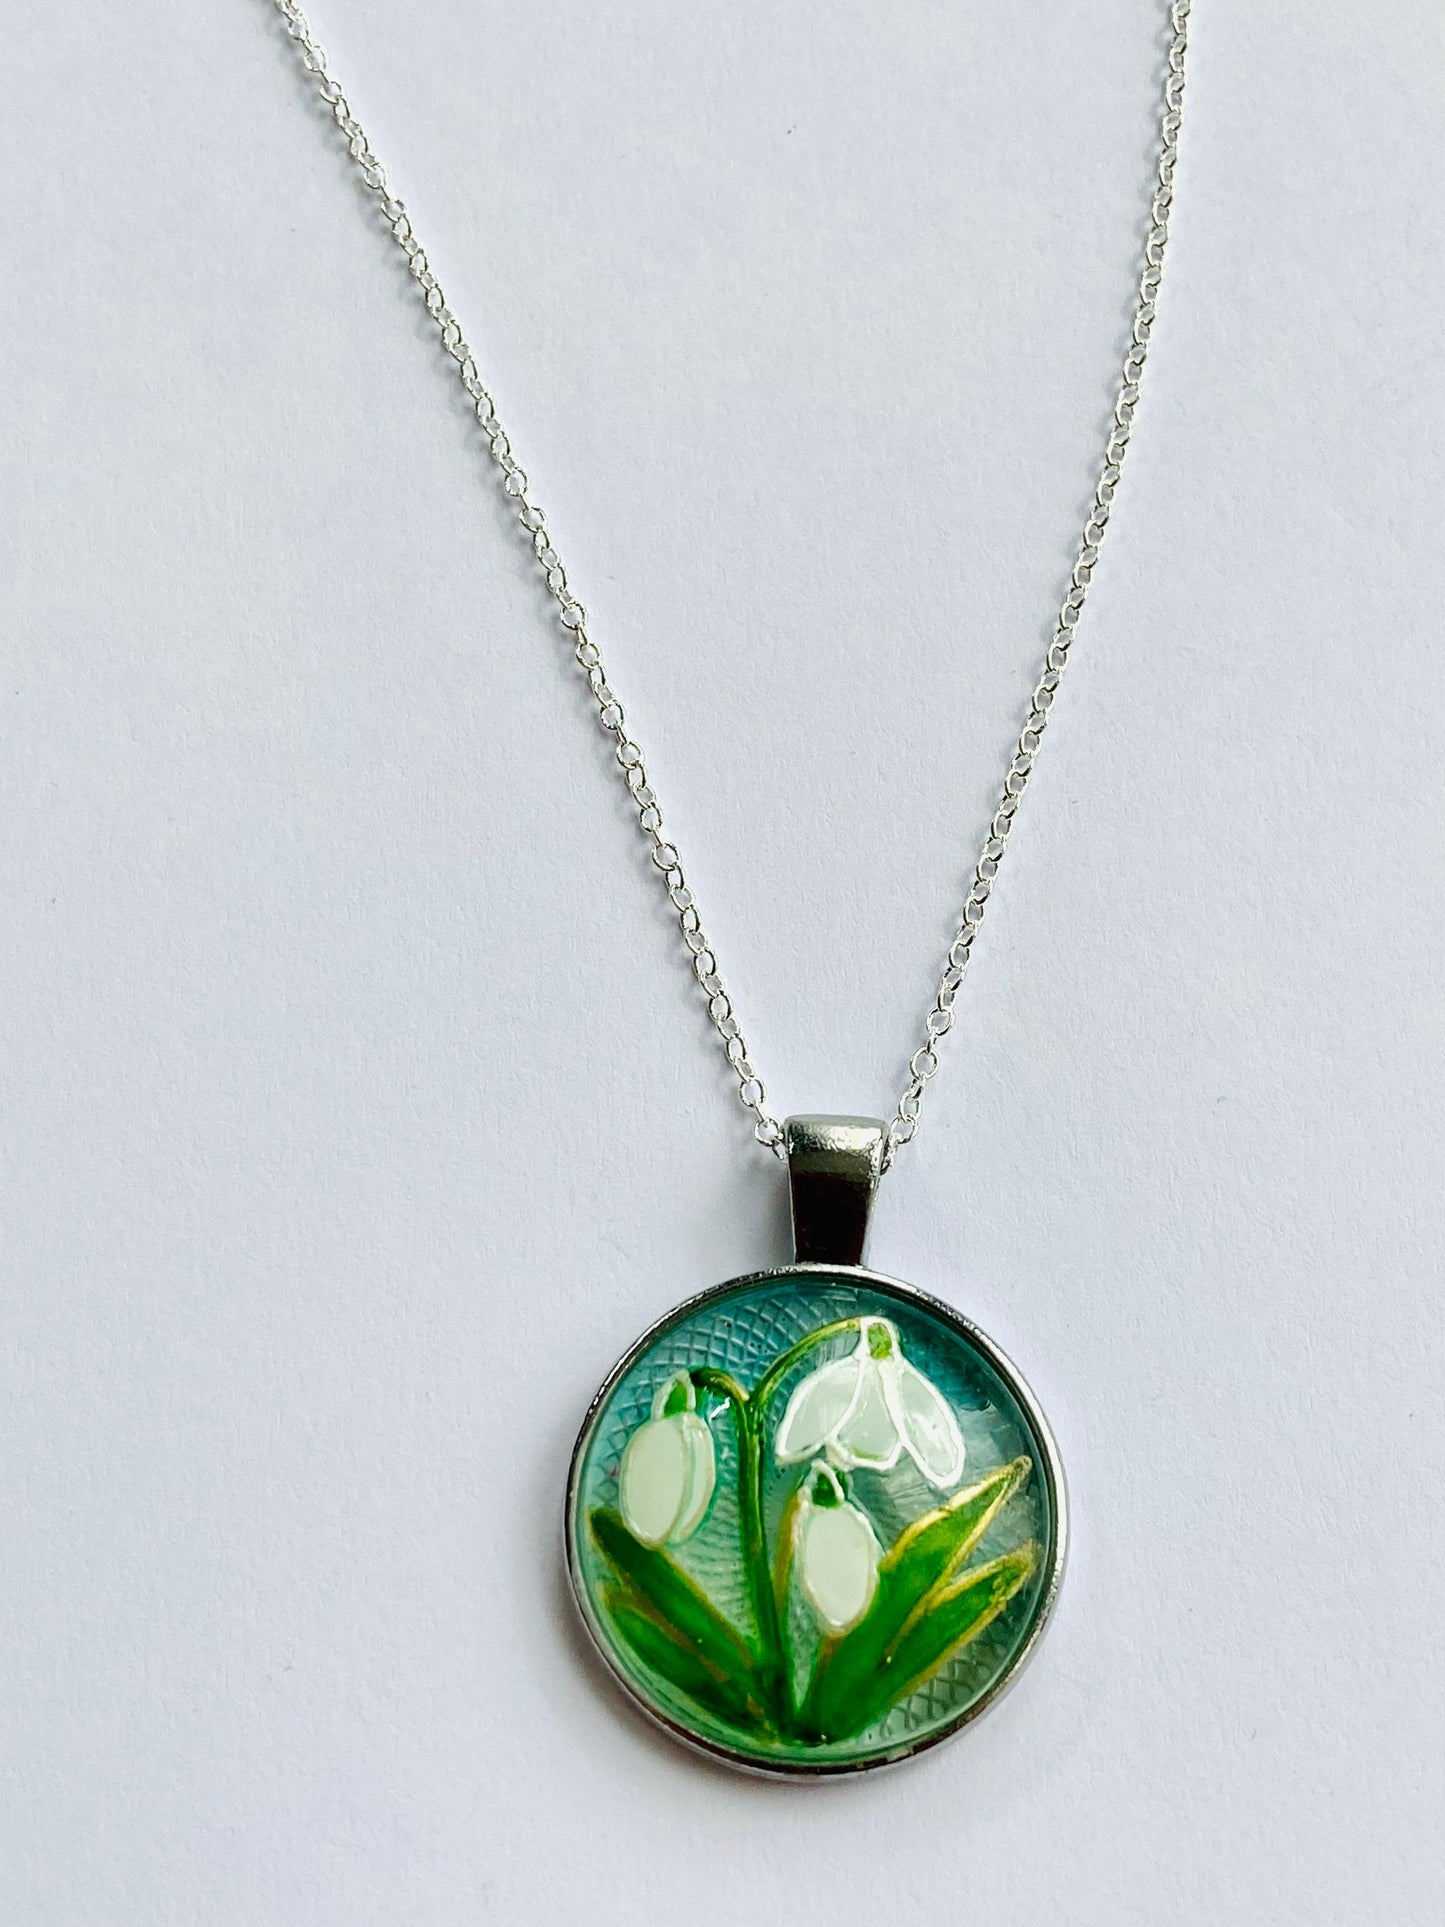 Snowdrops design hand painted glass pendant necklace